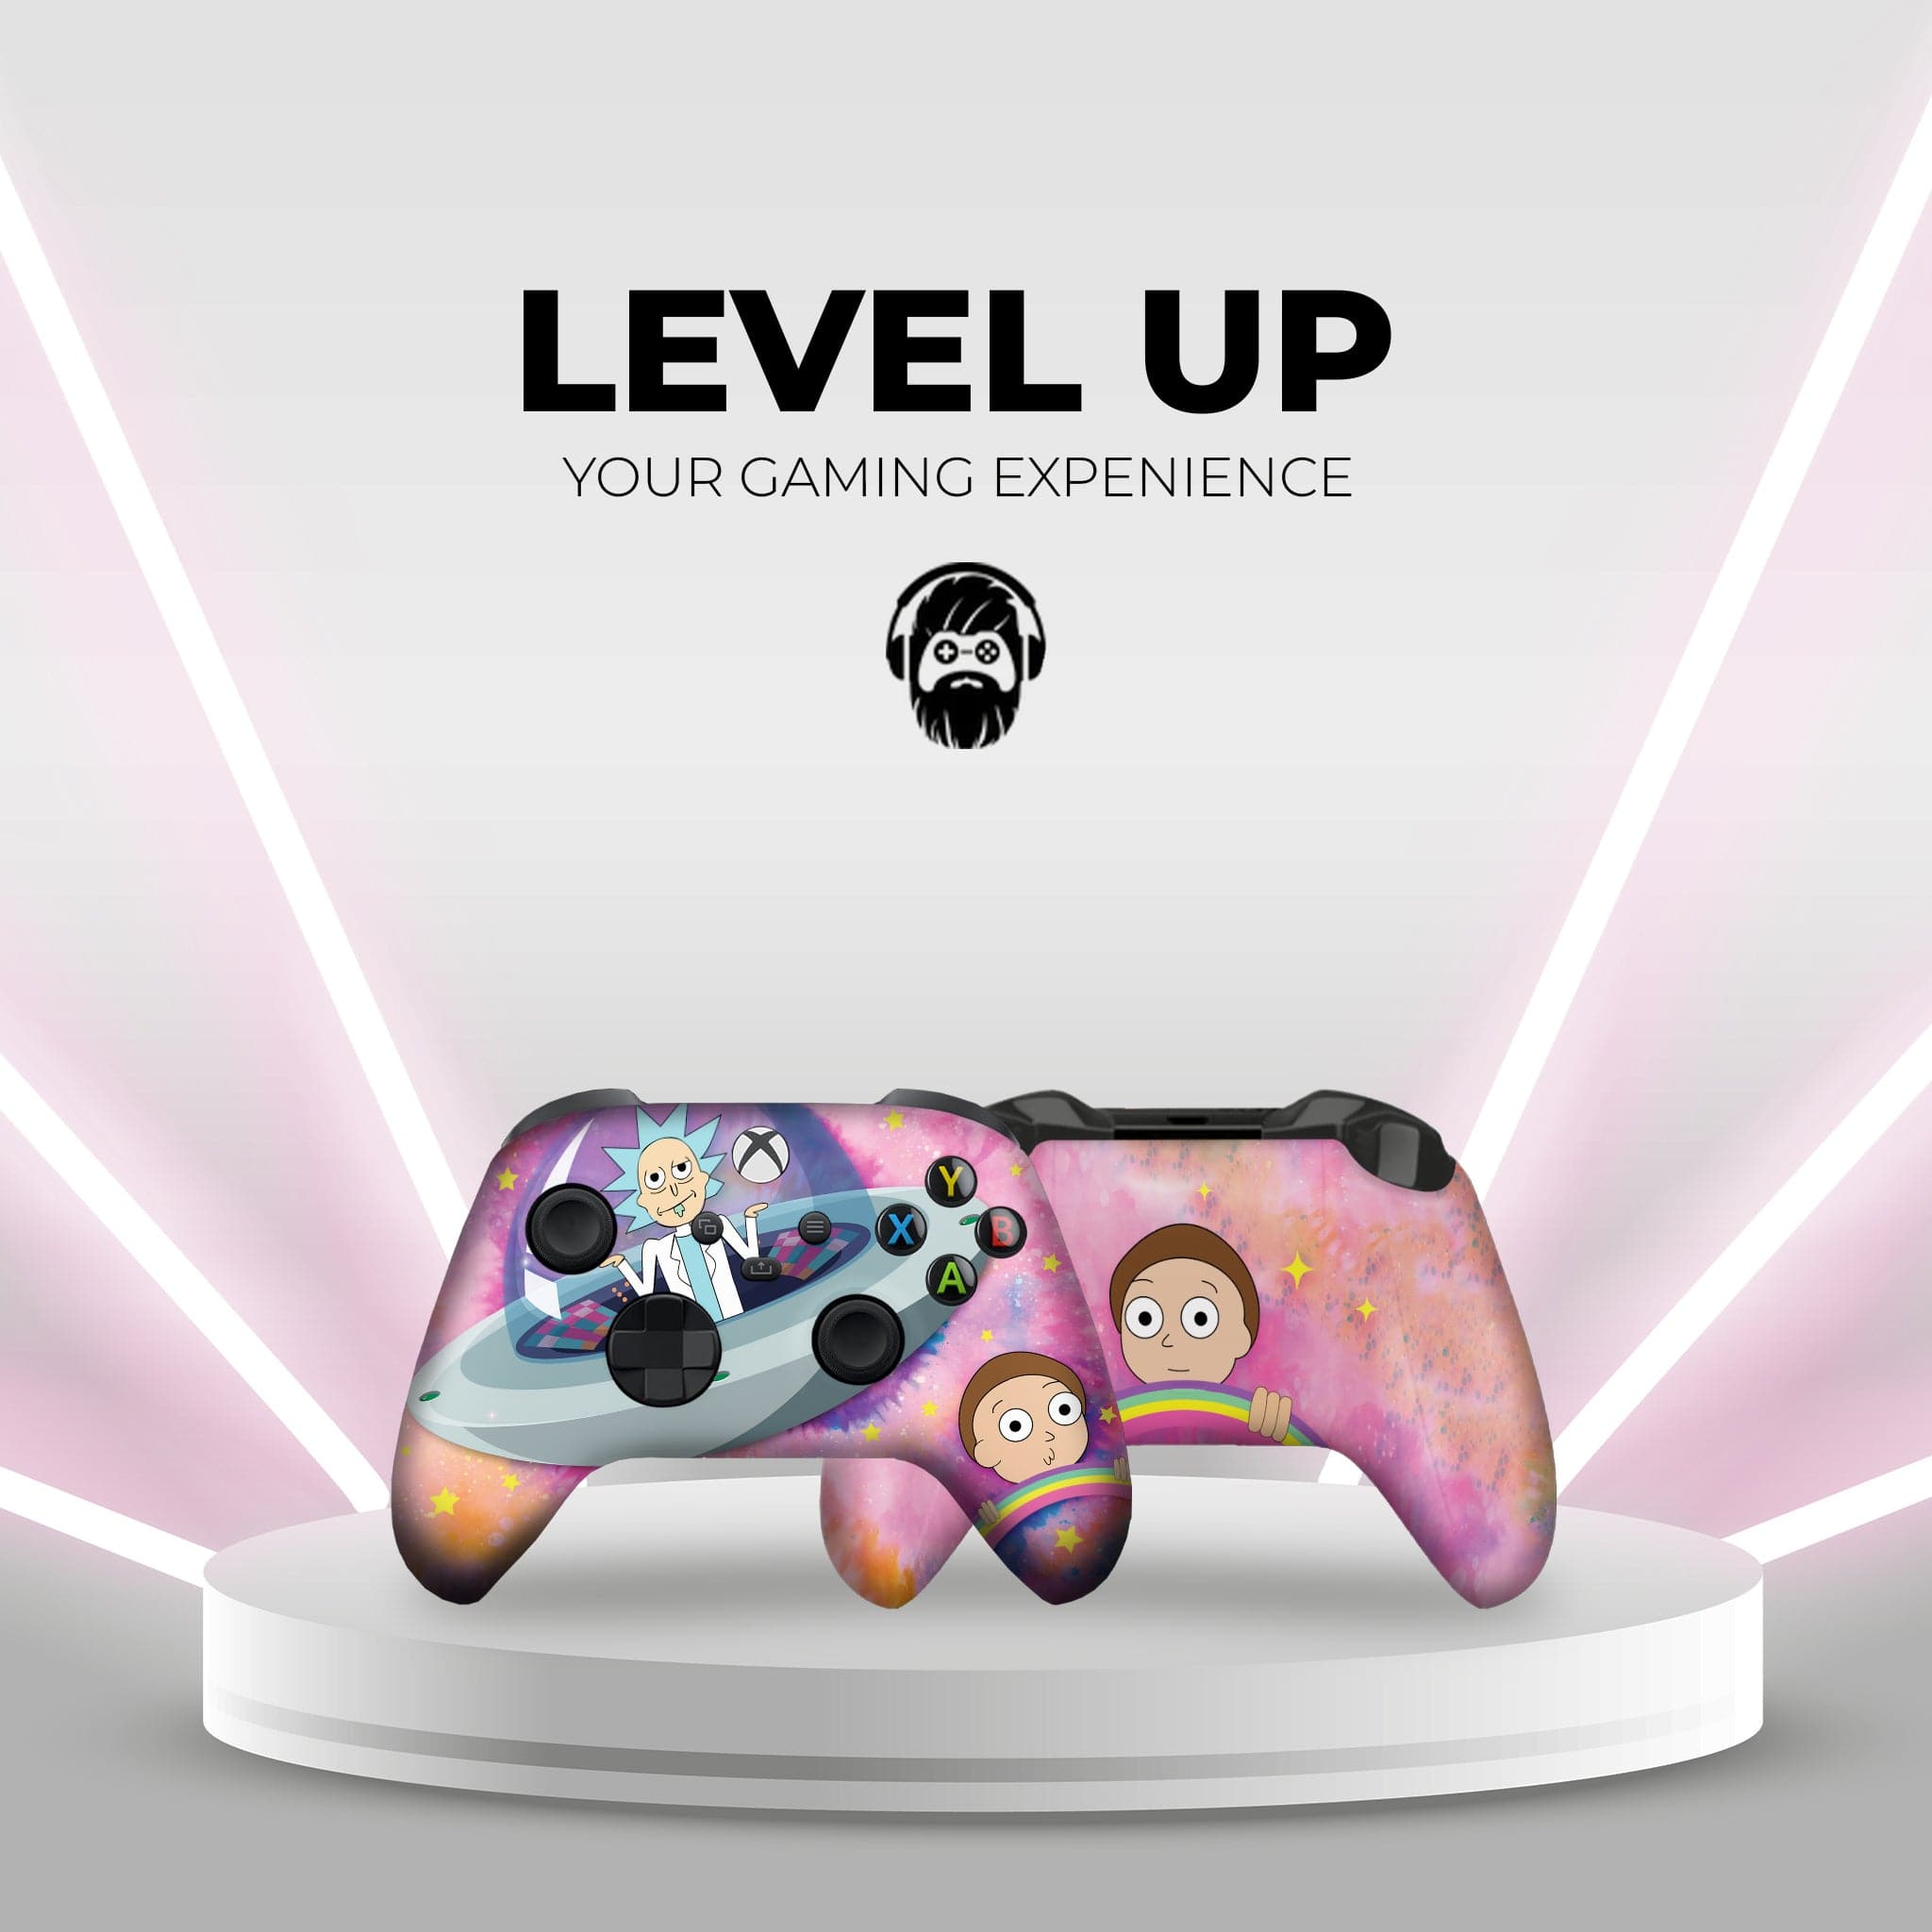 Schwifty Rick & Morty inspired Xbox Series X Controller